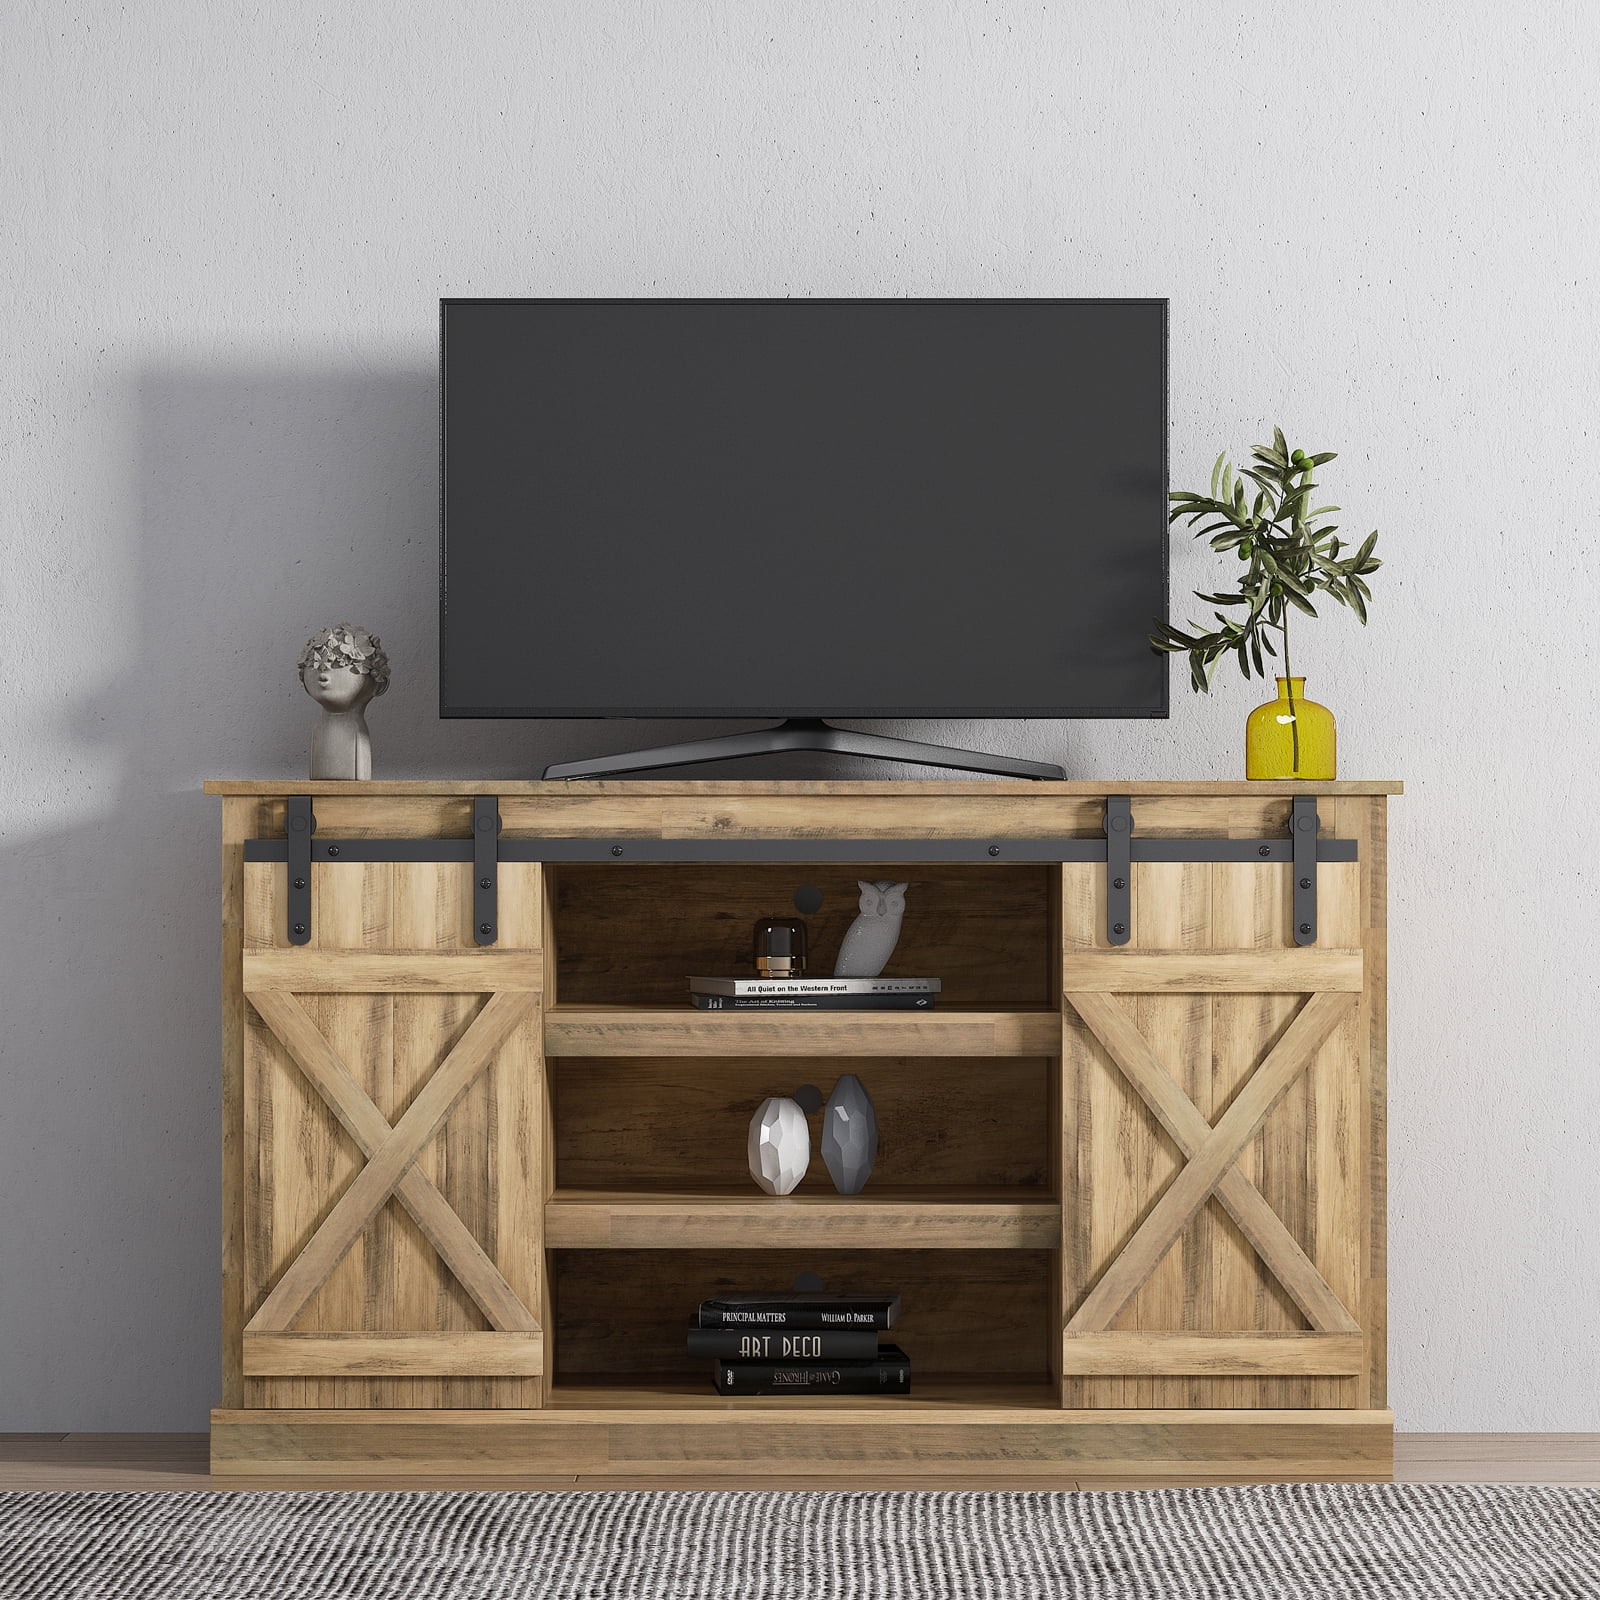 Details about   Industrial TV Stand 65 Rustic Gray Wood Media Console Entertainment Center Large 